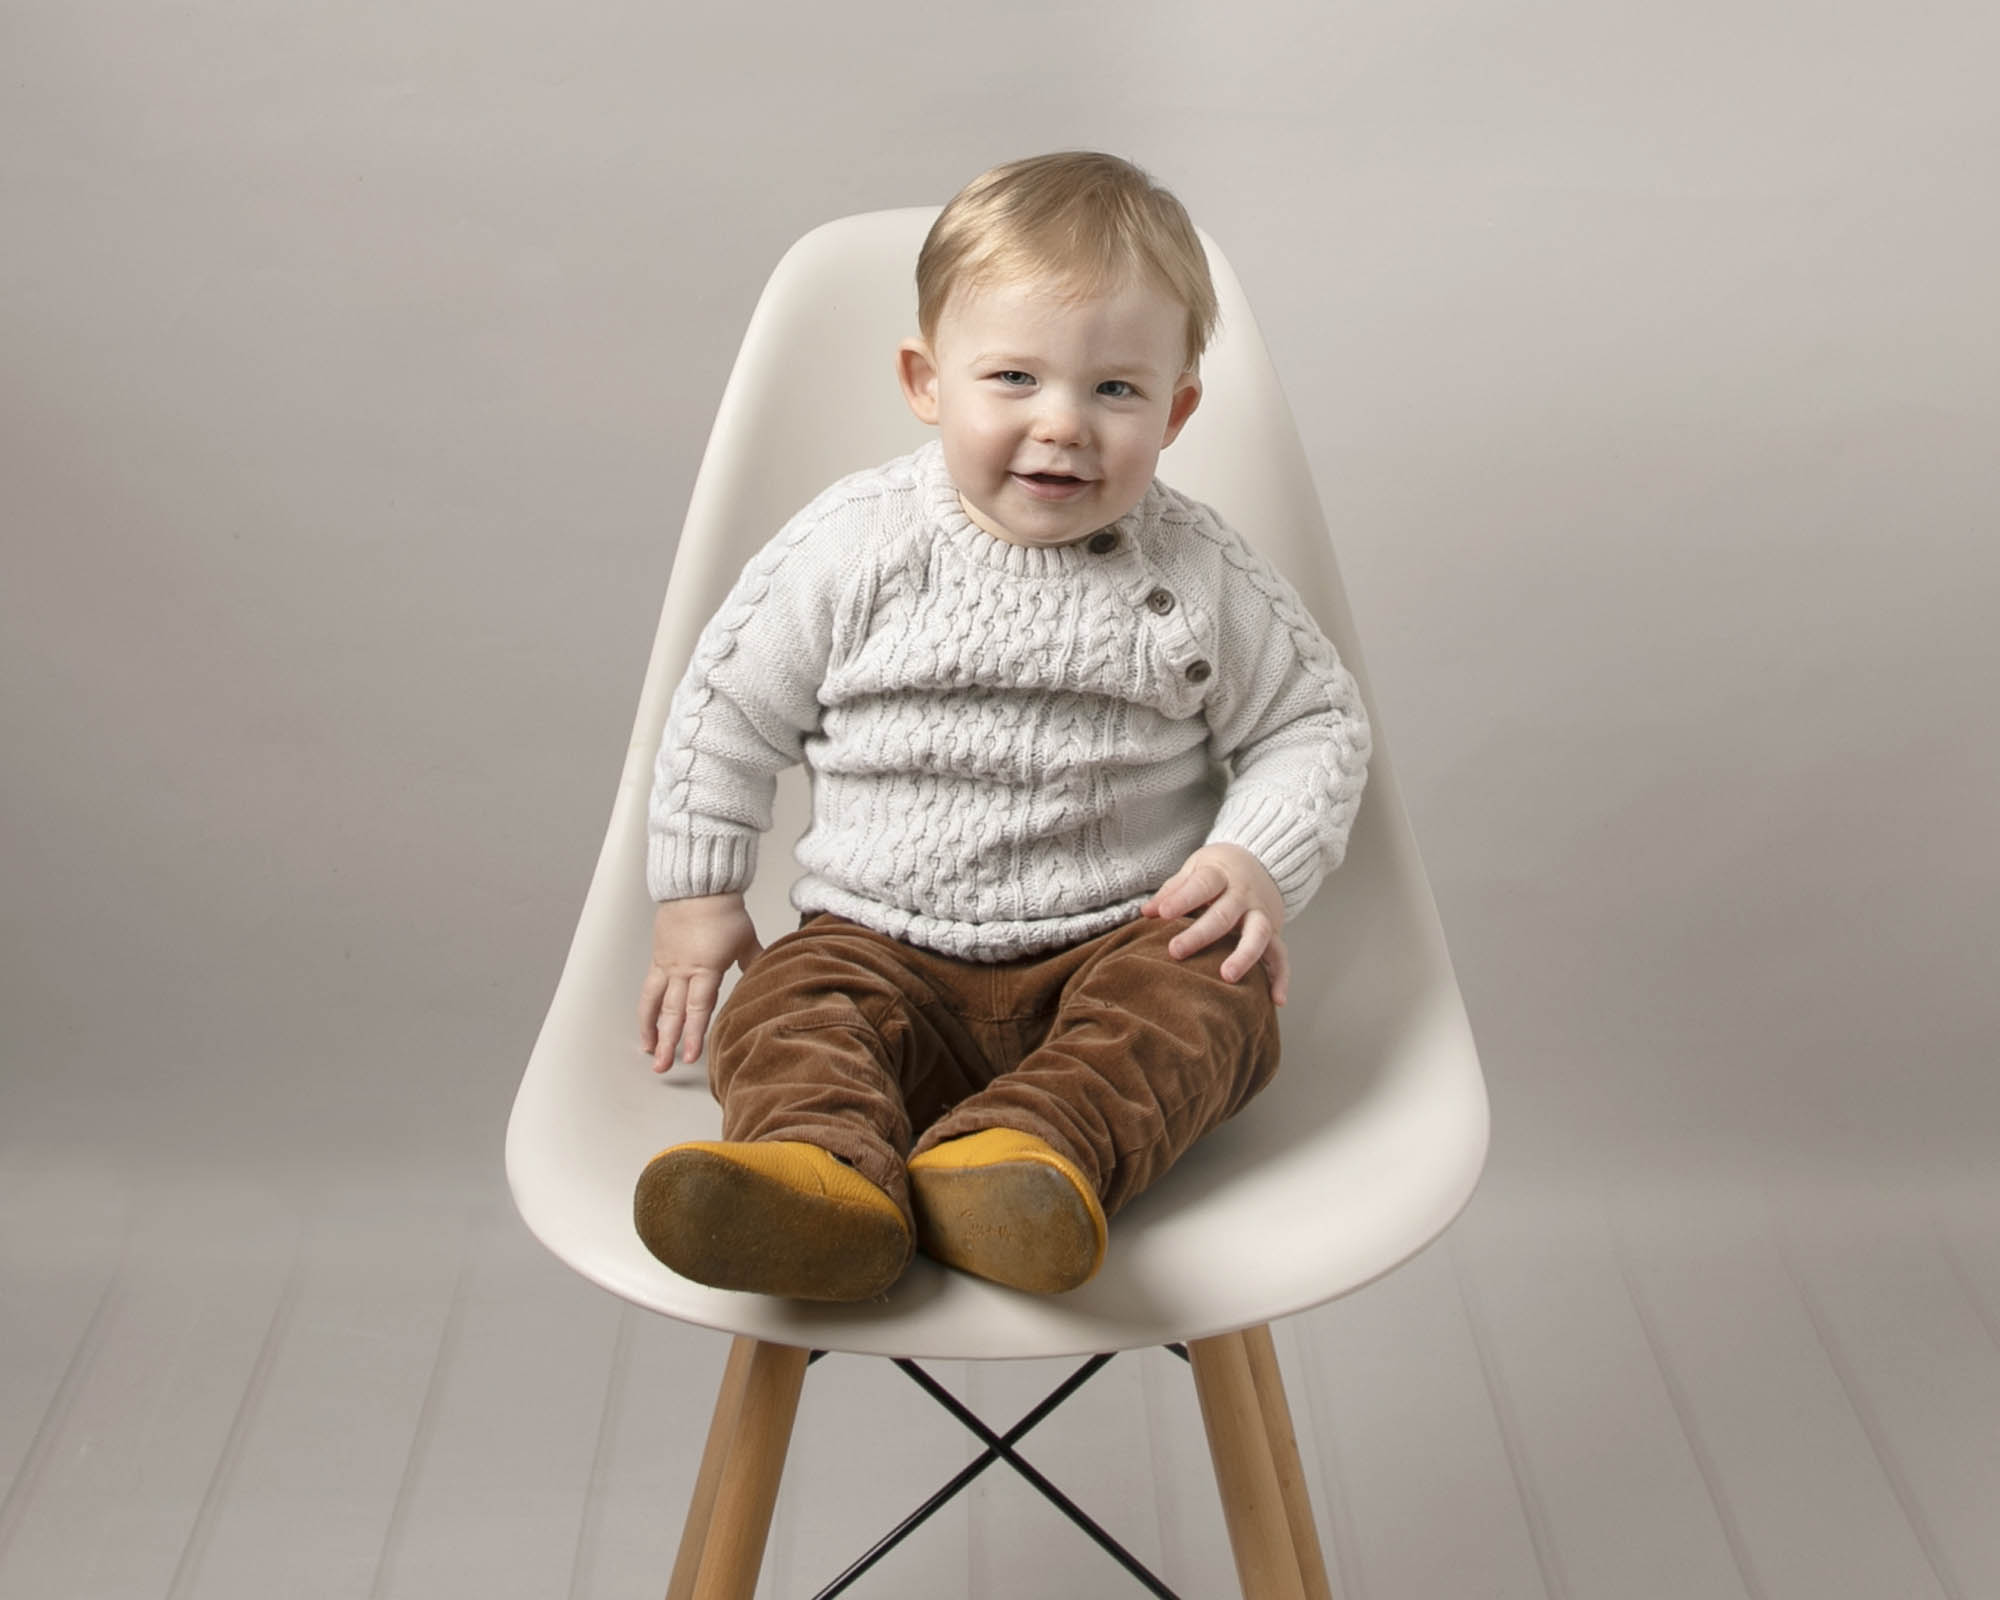 Baby boy sat on a cream hermes chair, wearing brown cord and cream knit jumper. Baby is smiling at his baby photography session with Glasgow photographer